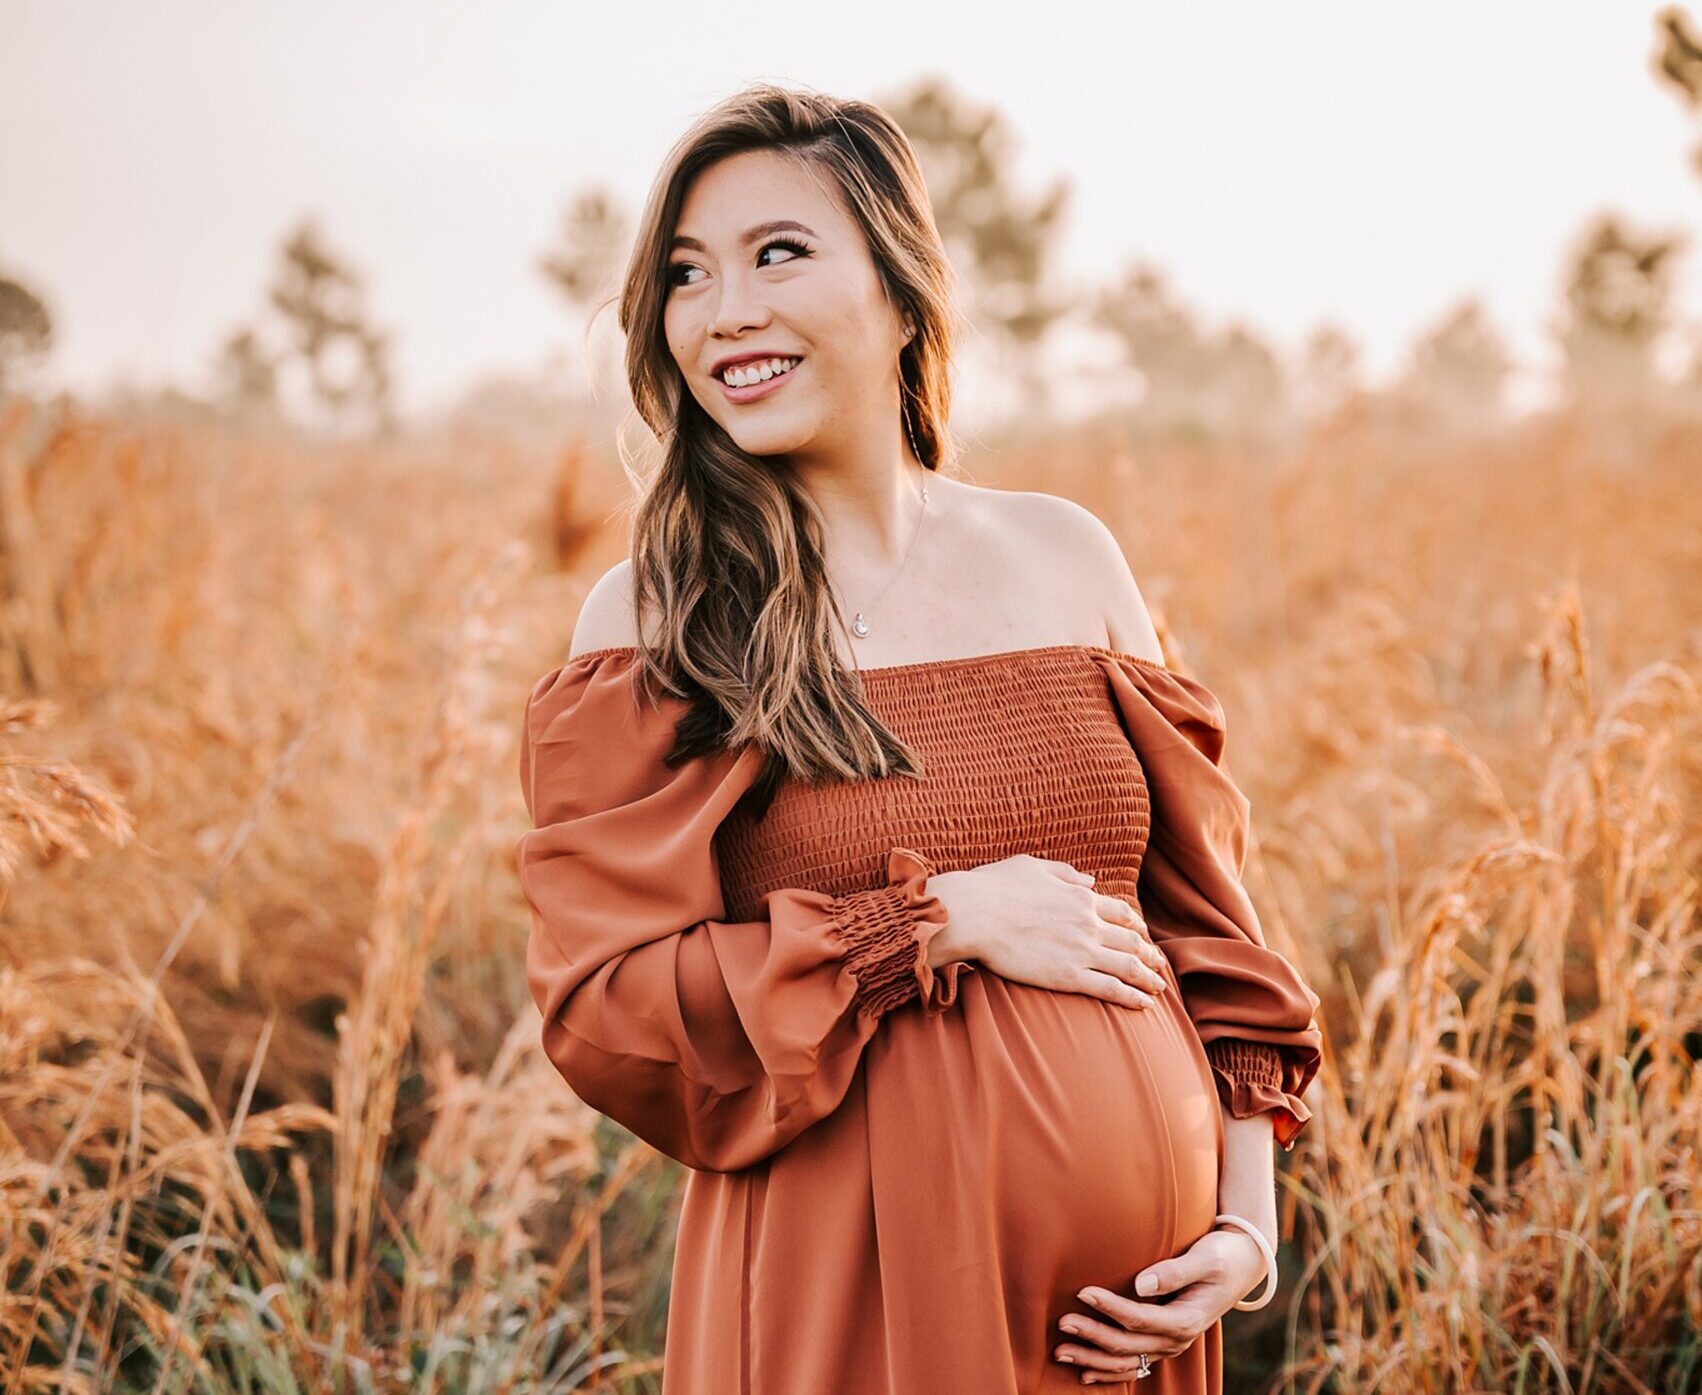 A mother to be holds her bump while looking over her shoulder in a field of tall grass wake forest obgyn